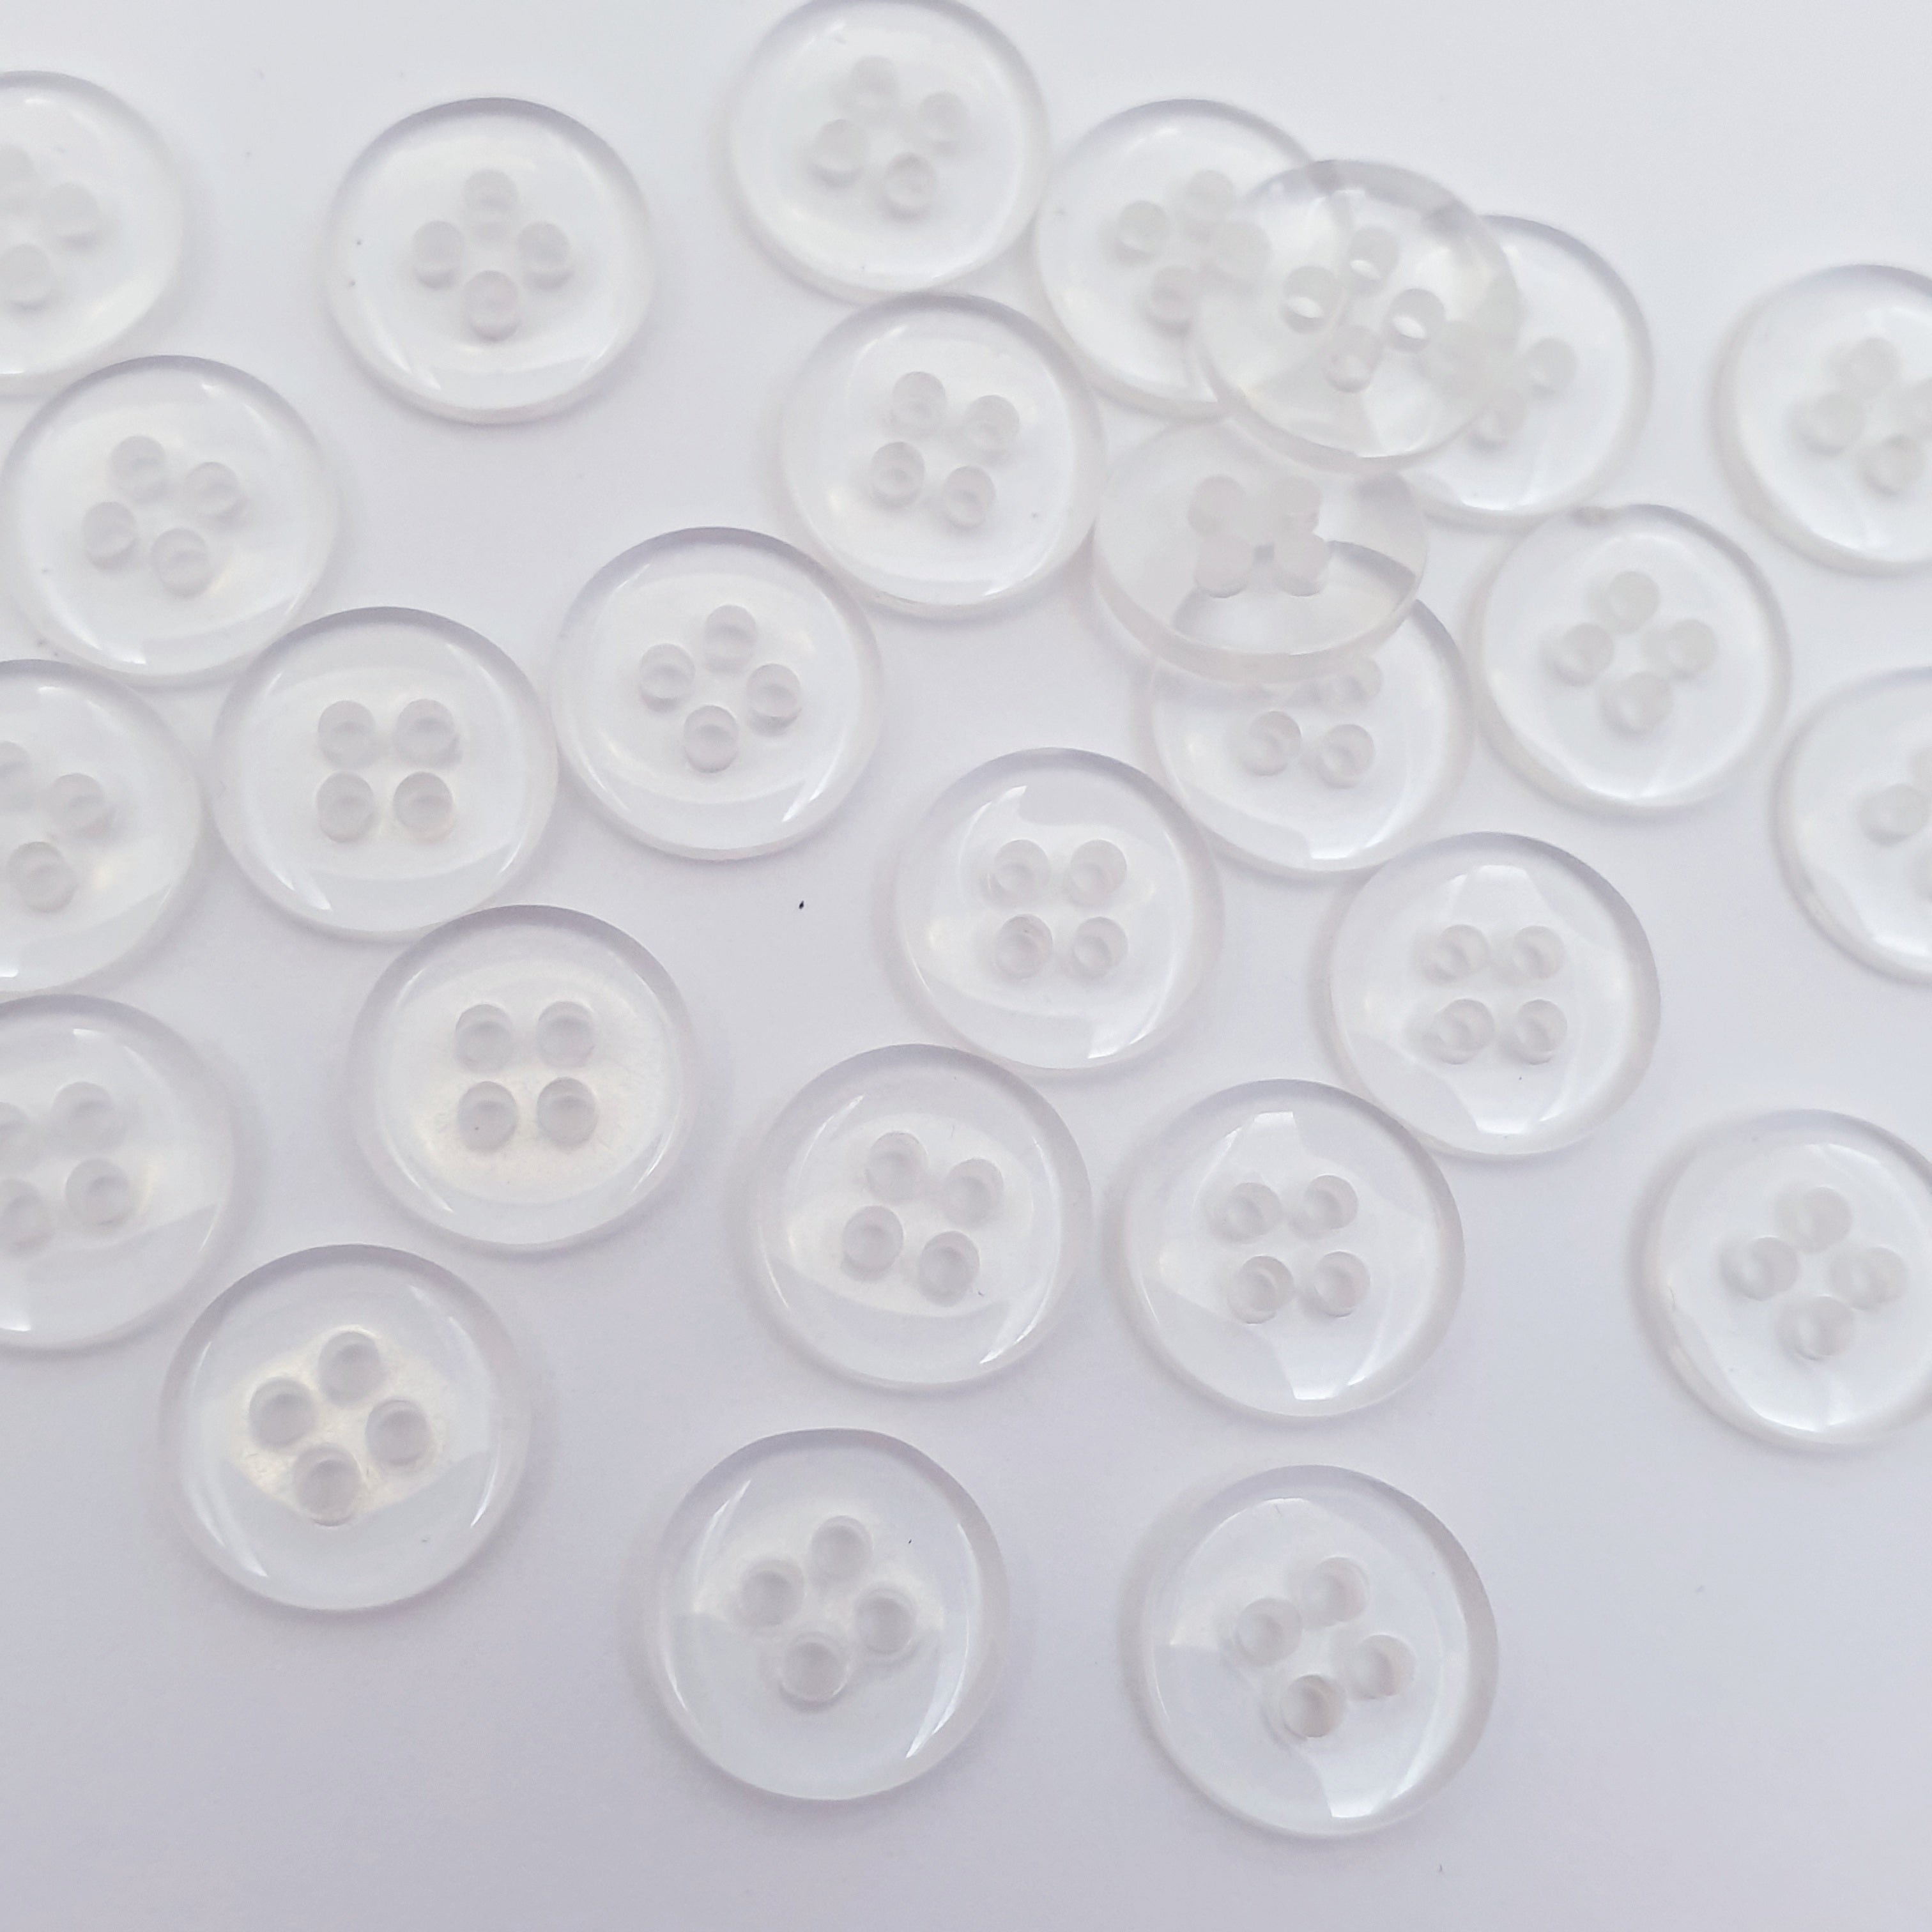 MajorCrafts 100pcs 11.5mm Transparent Clear 4 Holes Small Round Resin Sewing Buttons